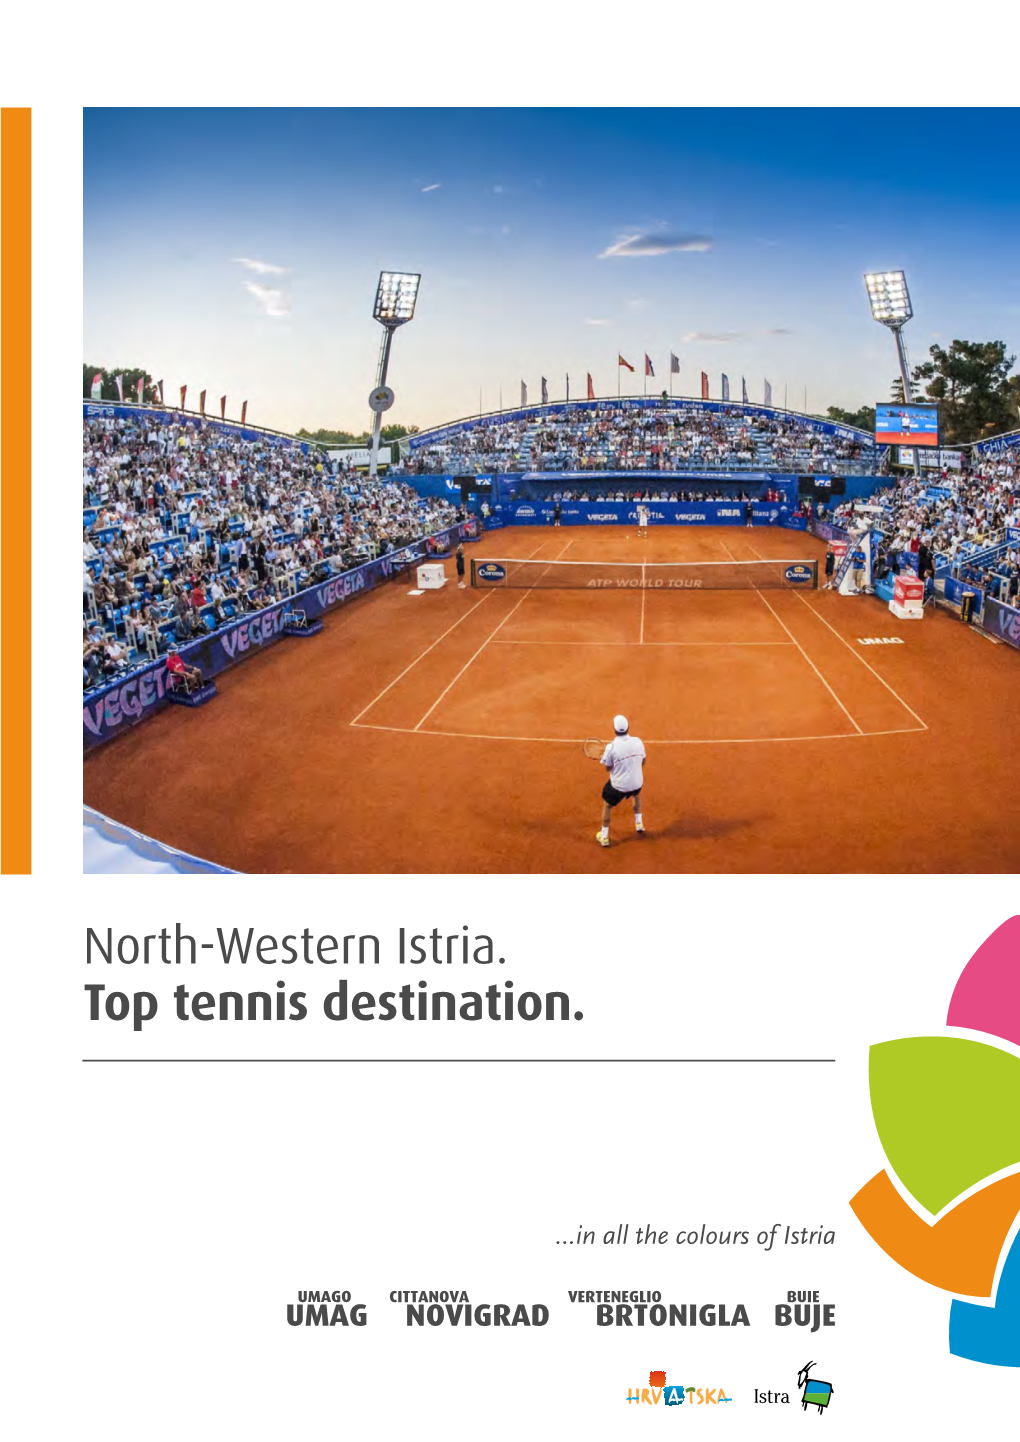 Tennis Tournaments. Attractive Matches in an Ideal Setting